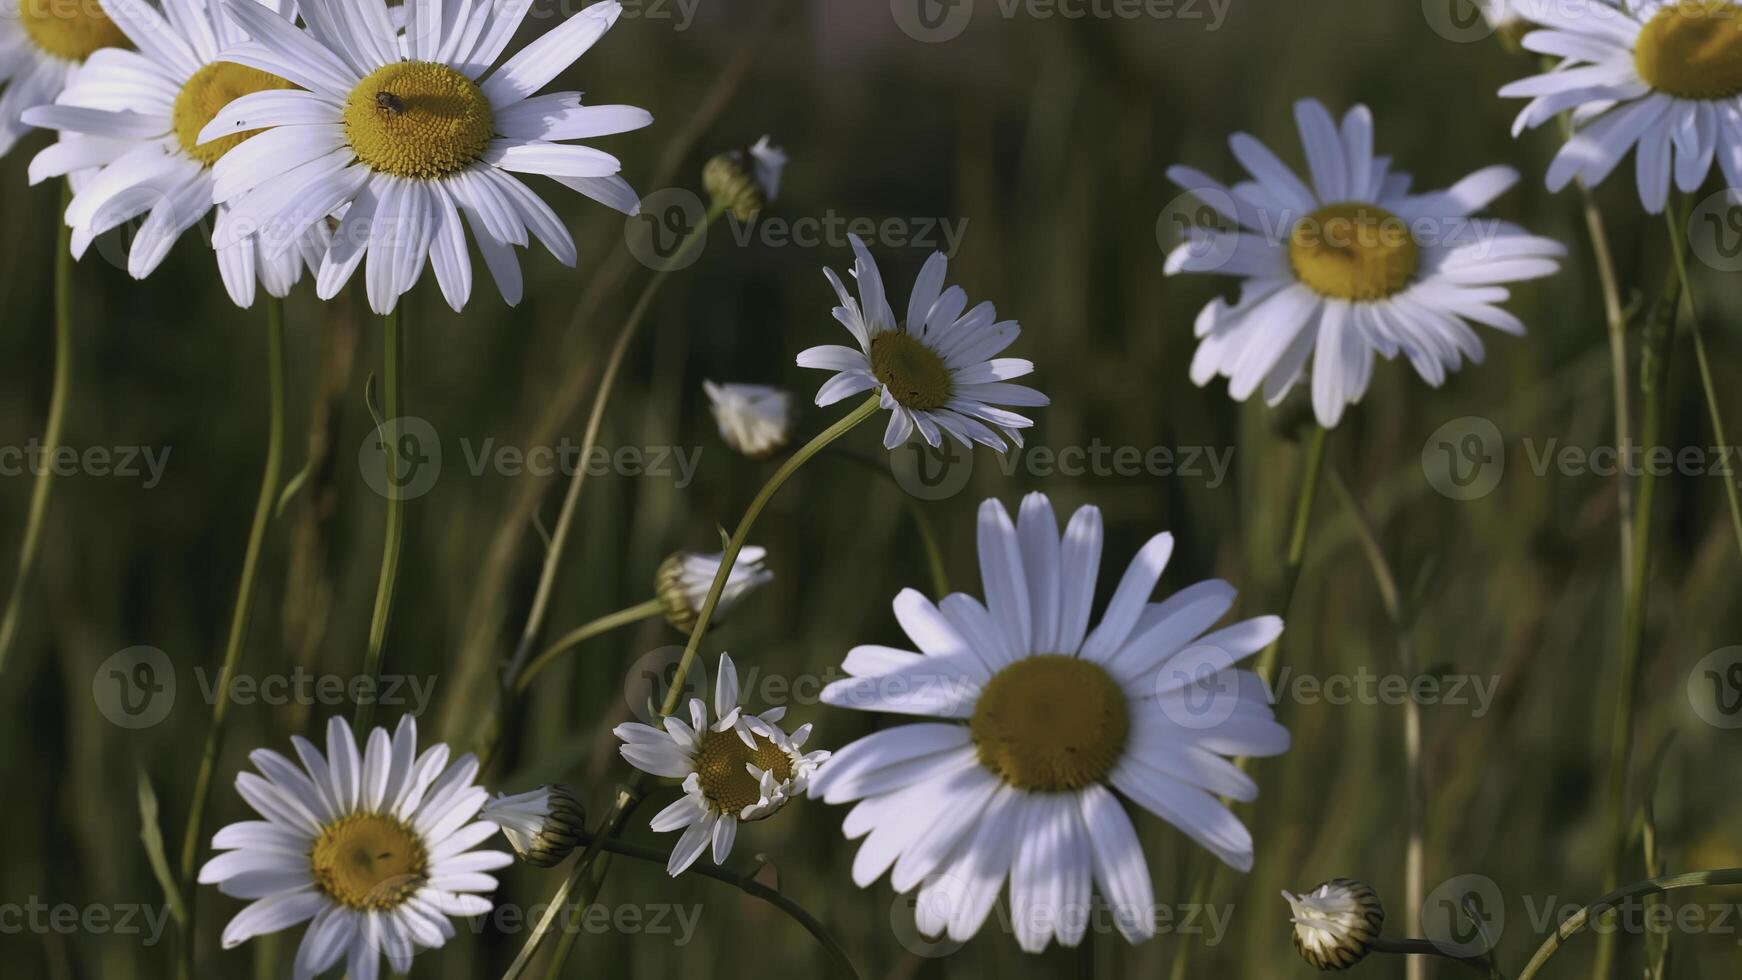 A beautiful chamomile grows in a field and insects crawl on it. CREATIVE. A flower with white petals and a yellow center. Insects are on the flower. The wind blows a flower growing in a clearing photo